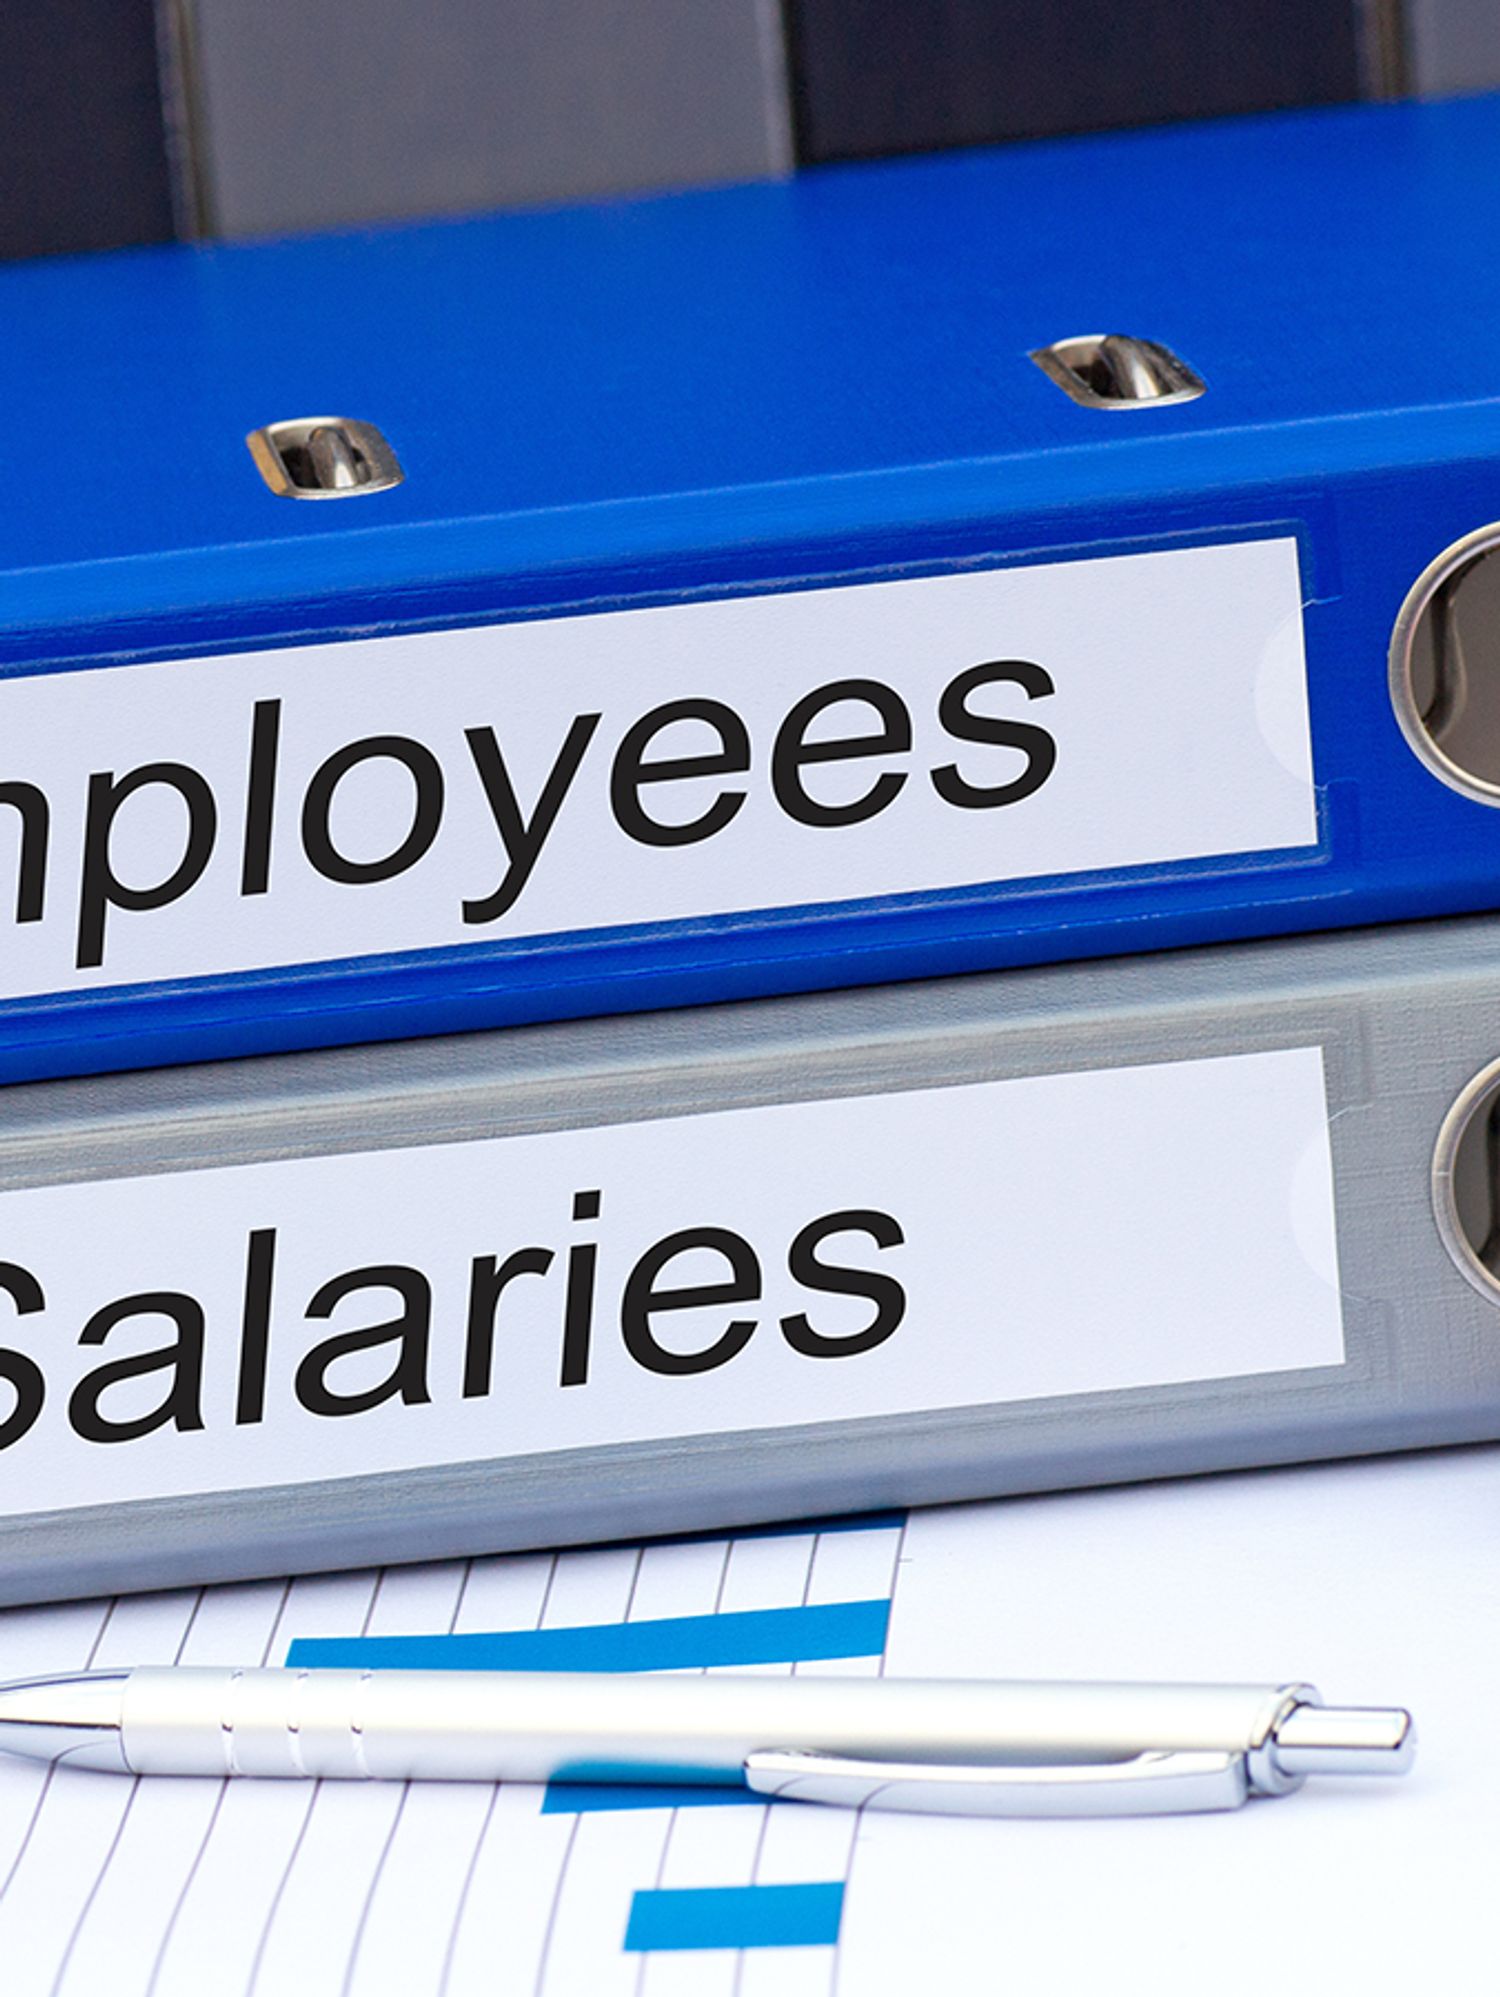 Salary threshold increases to $1,059 per week under DOL proposed